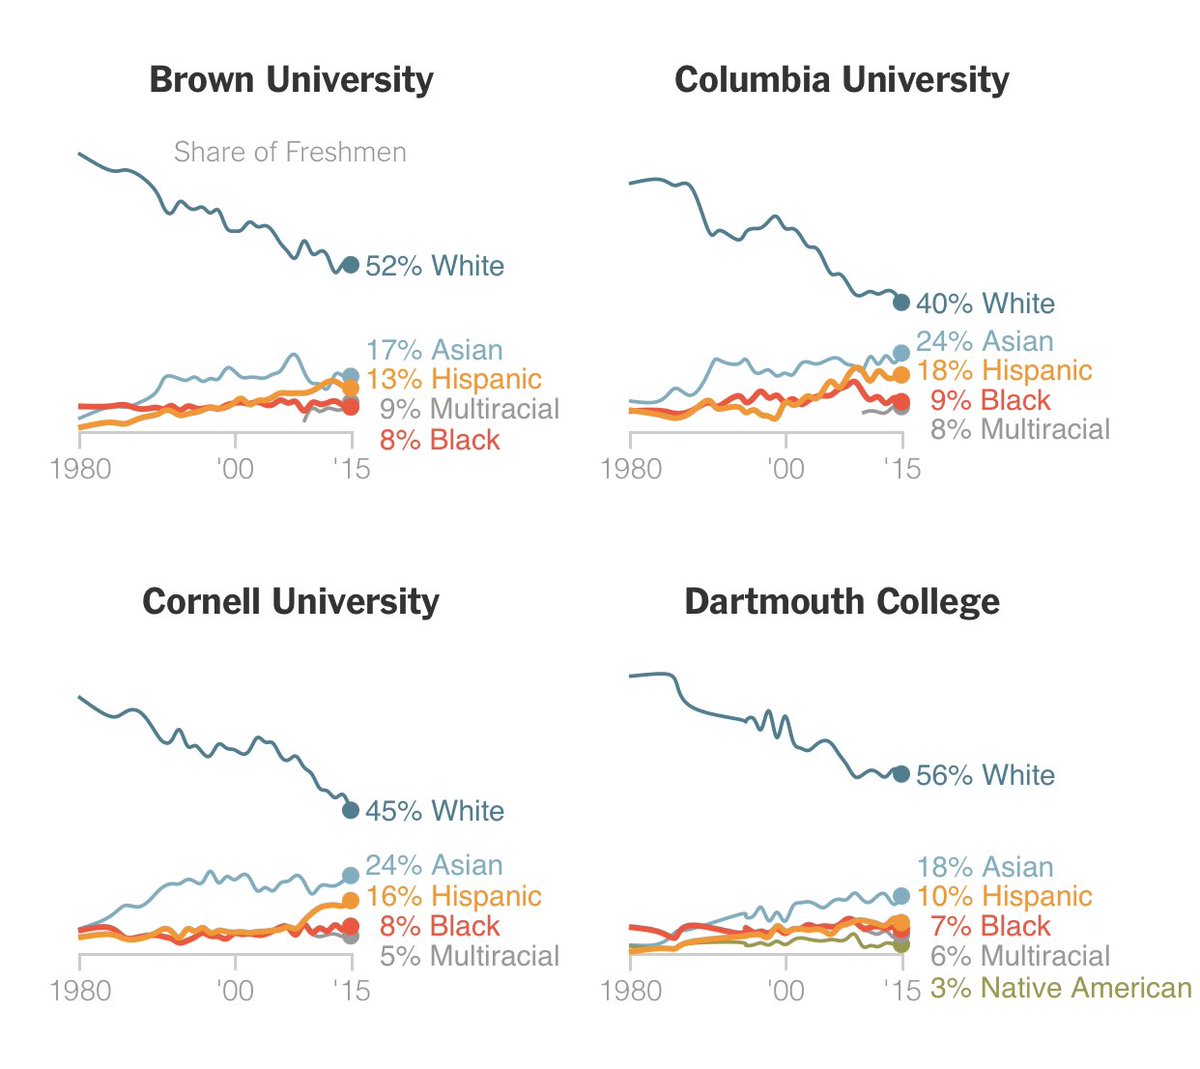 But there are more Asian students than Black students at every Ivy League in the country & according to the NYTimes “Even after decades of affirmative action, black and Hispanic students are more underrepresented at the nation’s top colleges and universities” so like…